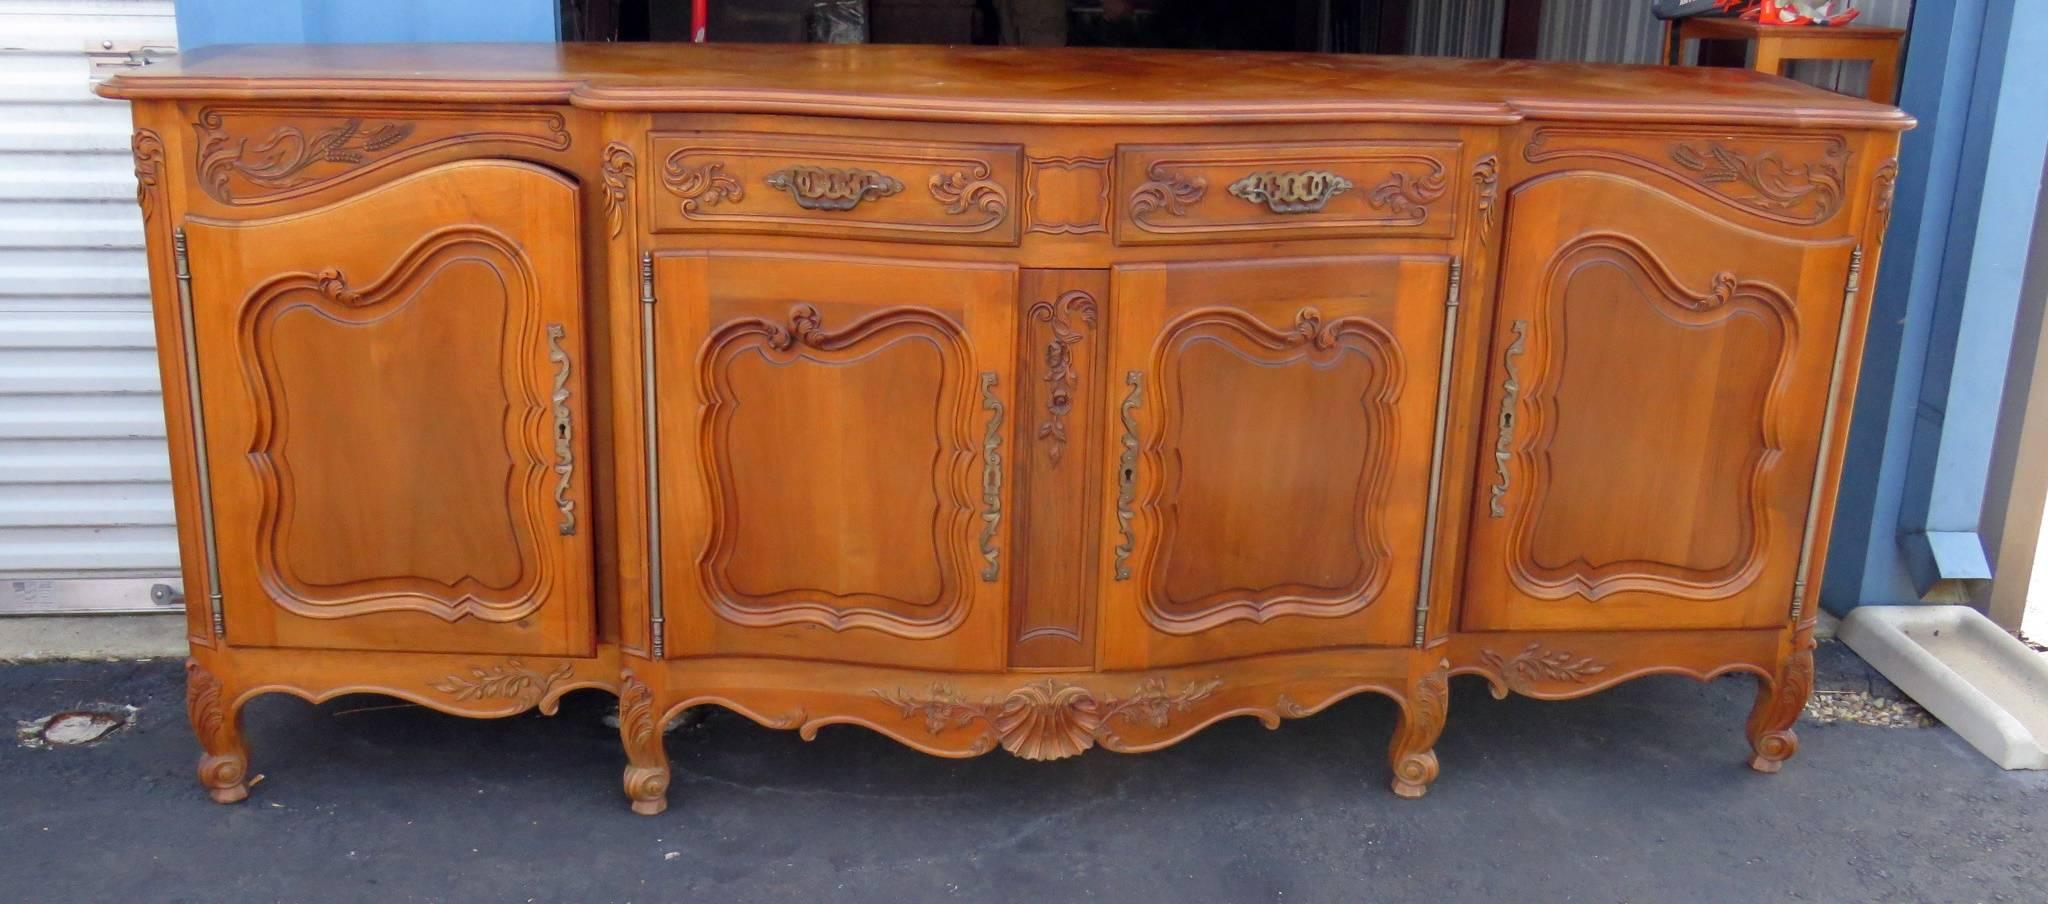 Auffray style sideboard with two drawers over four doors containing five shelves.